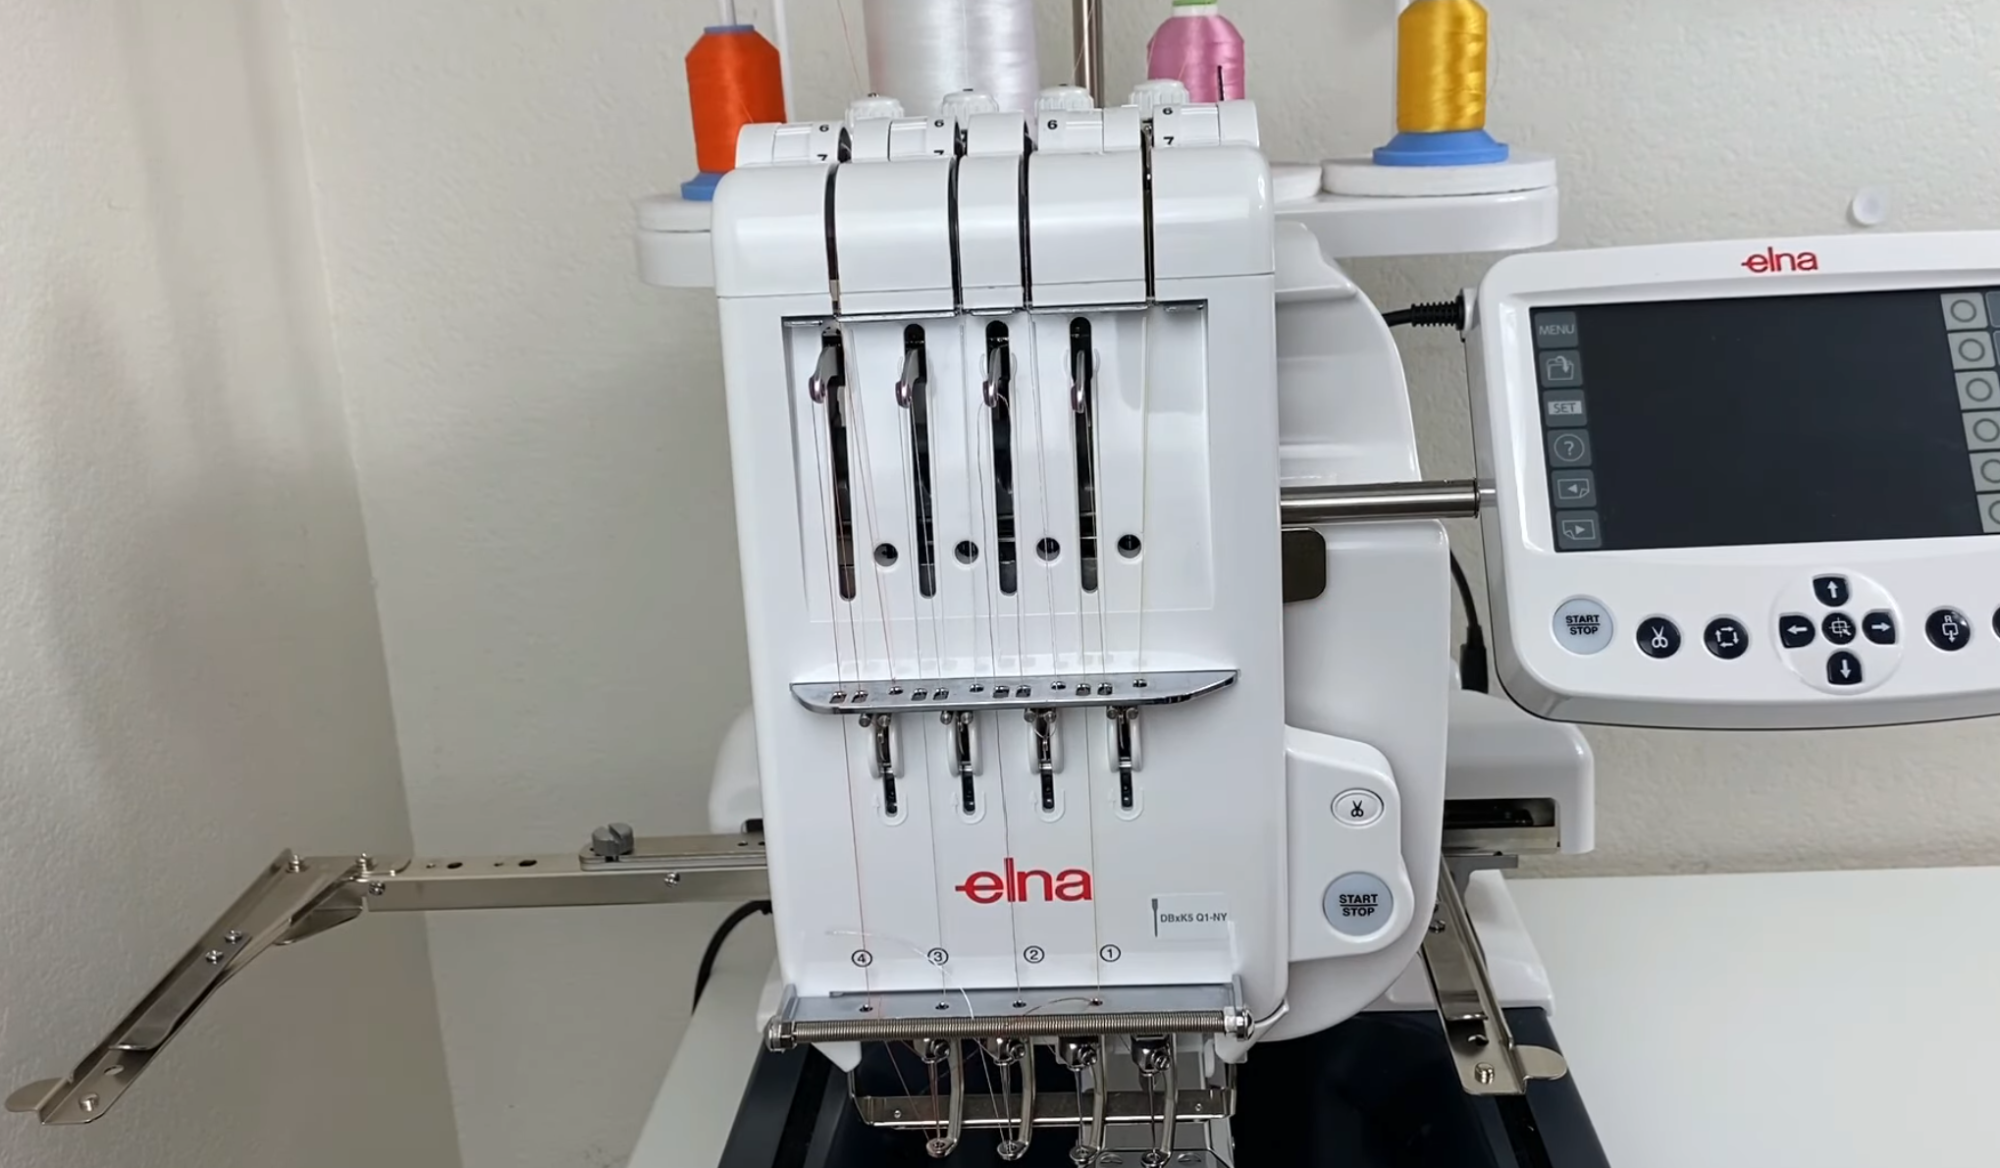 the elna 940 is almost identical to the janome mb4se